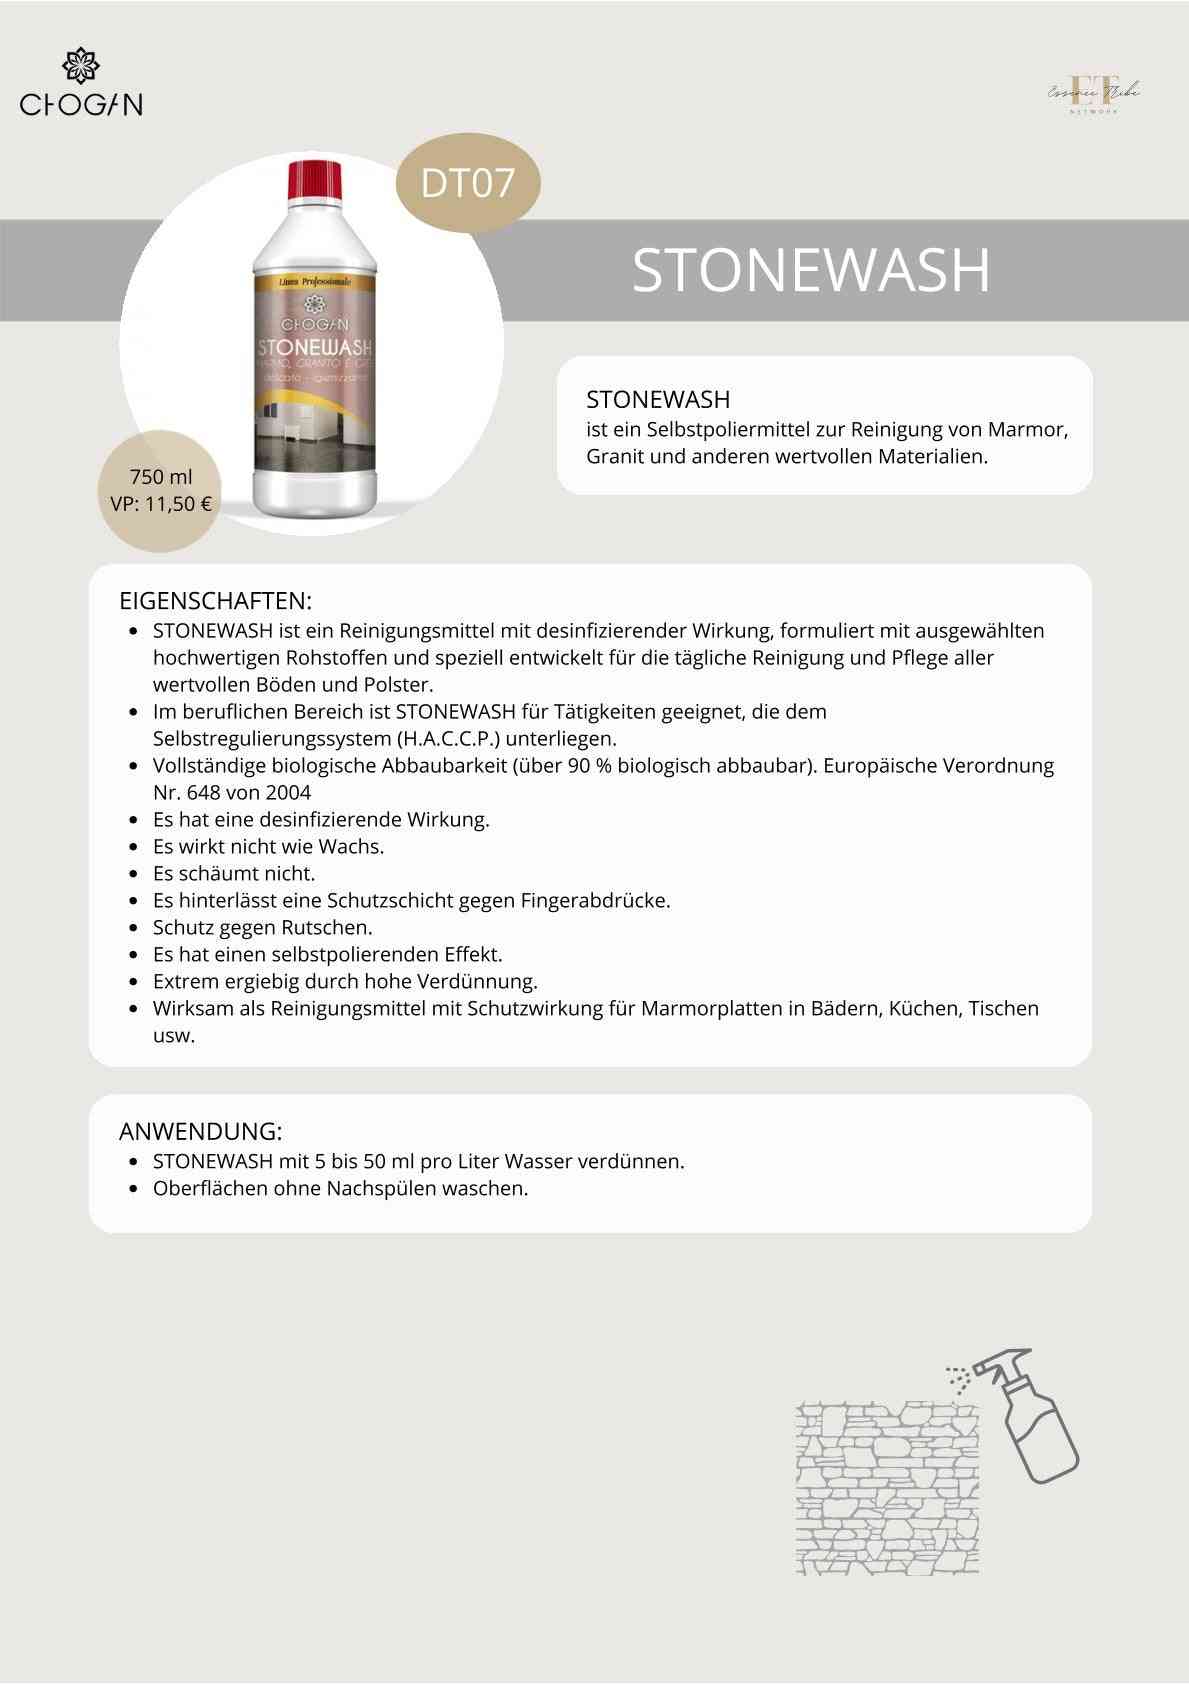 Stonewash – hygiene cleaner with a self-gloss effect for granite, marble and stoneware